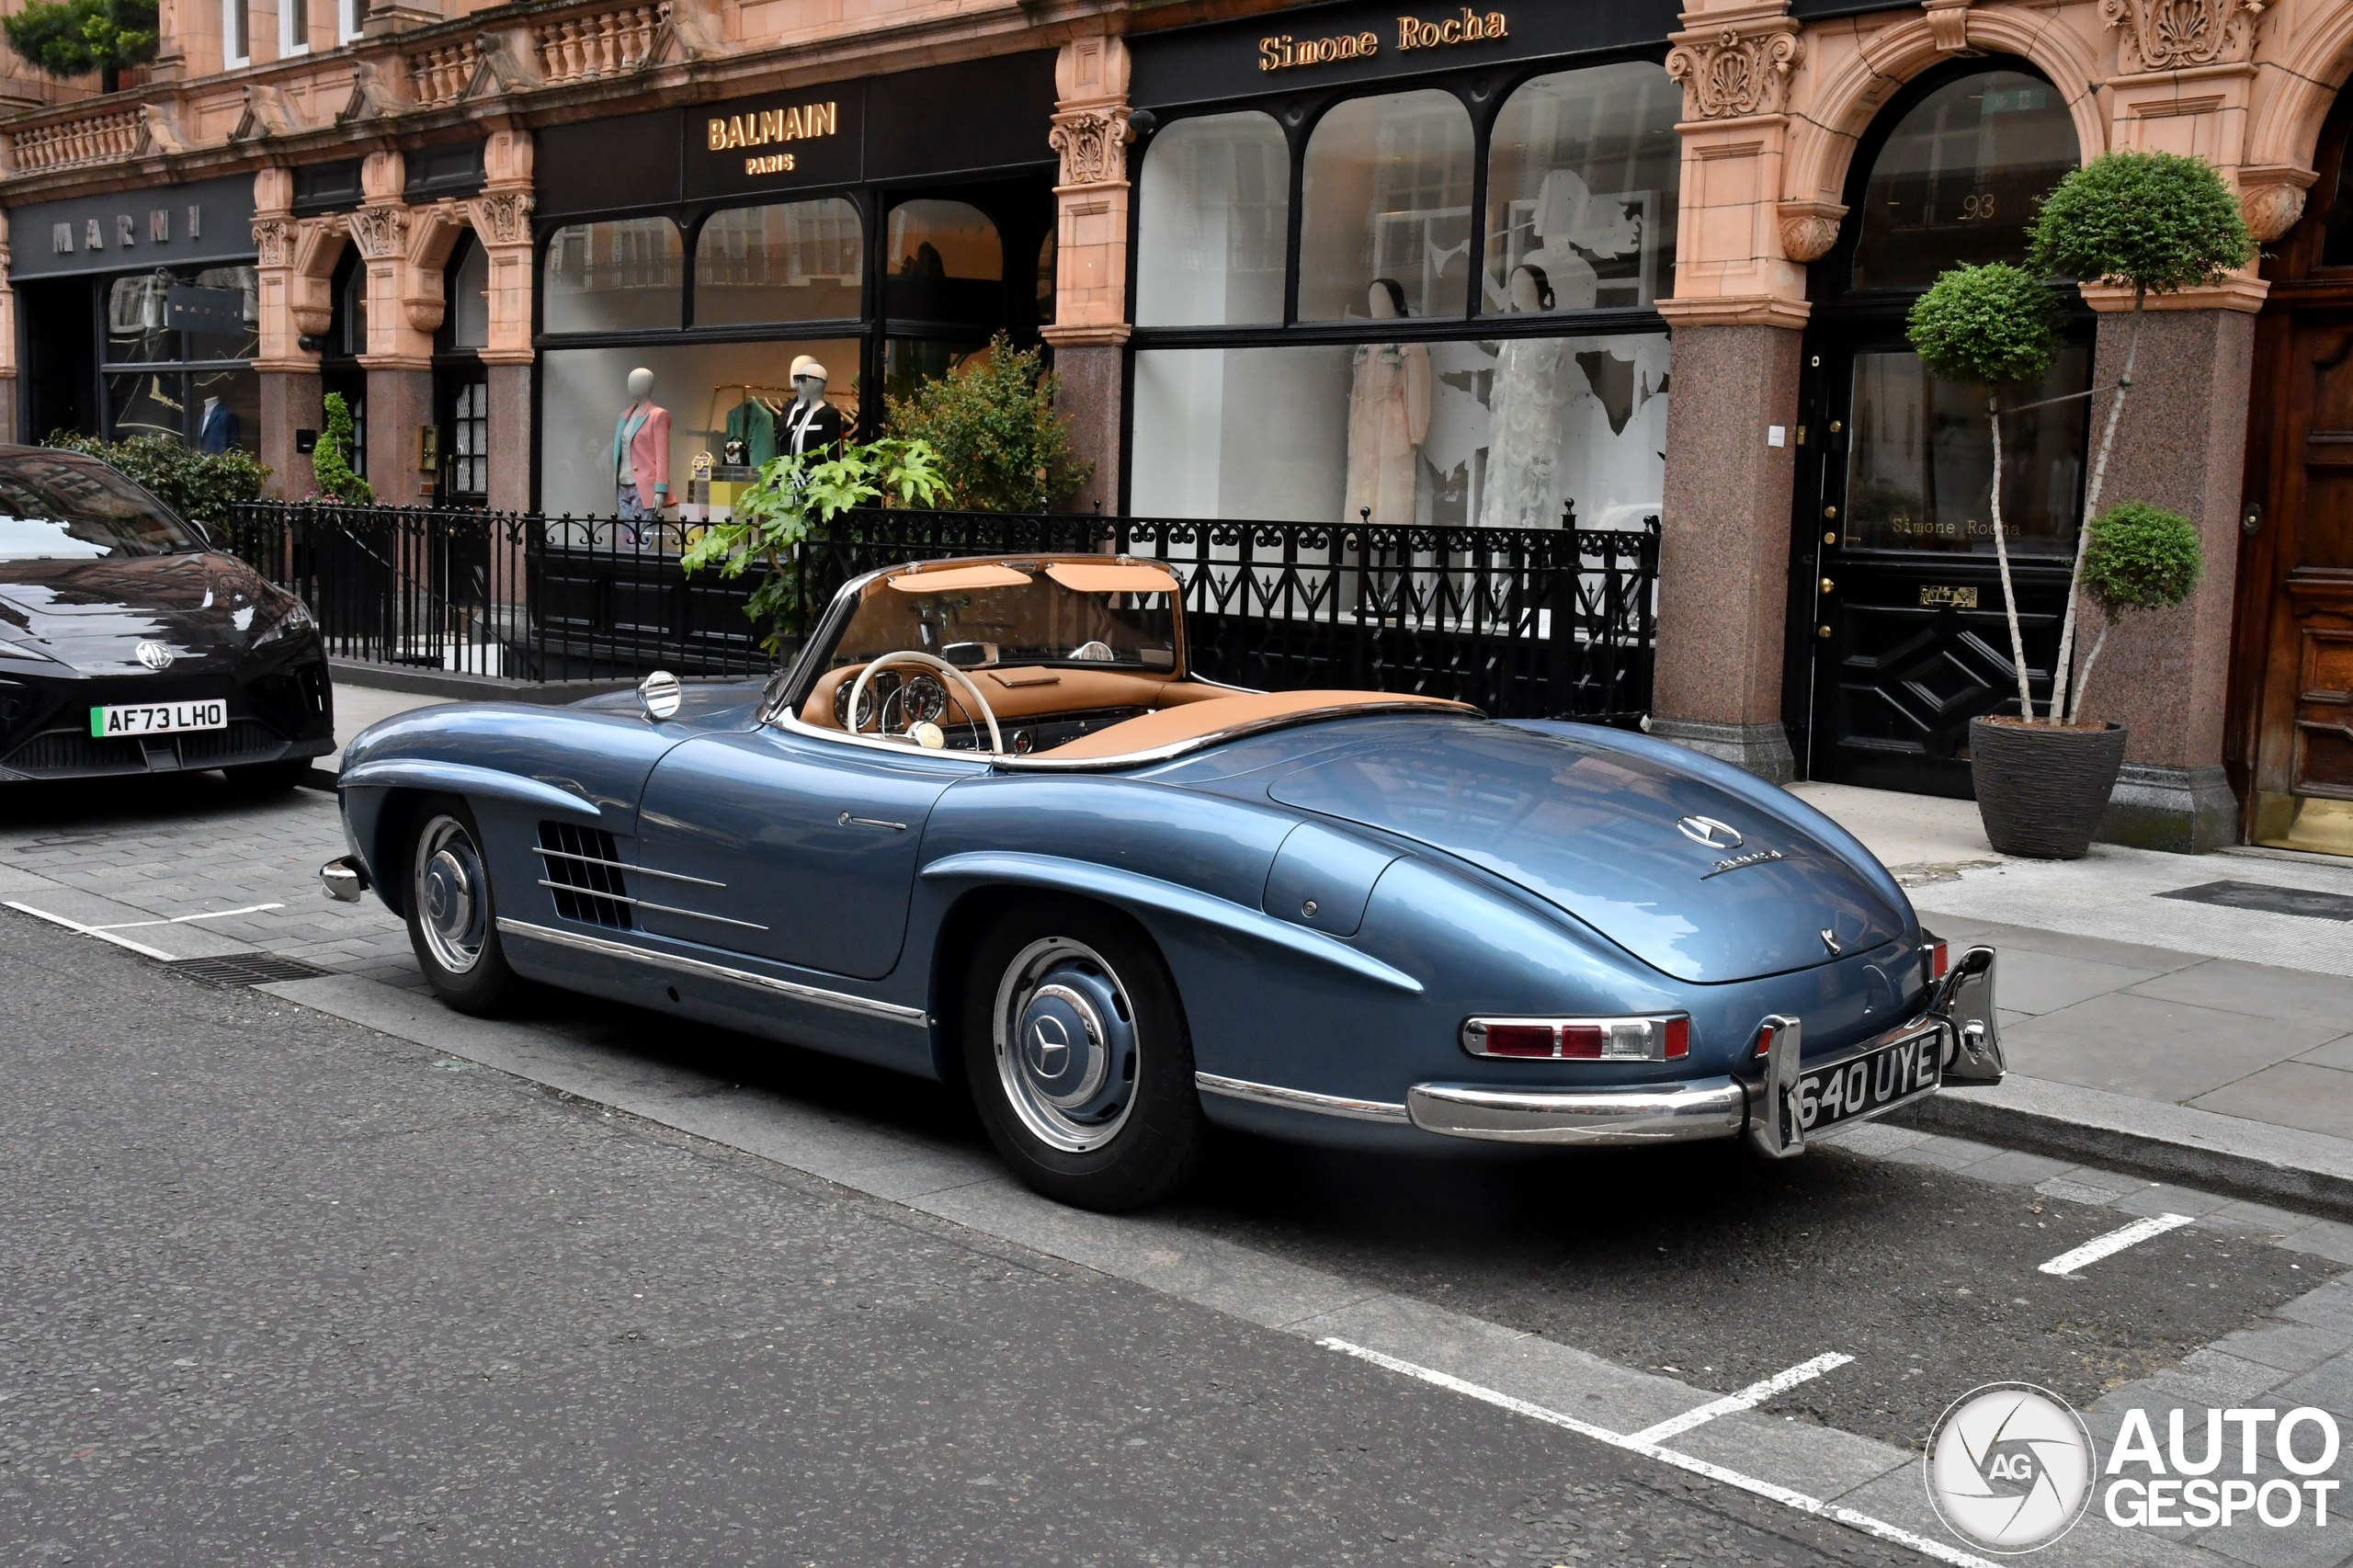 This 300 SL is quite perfect